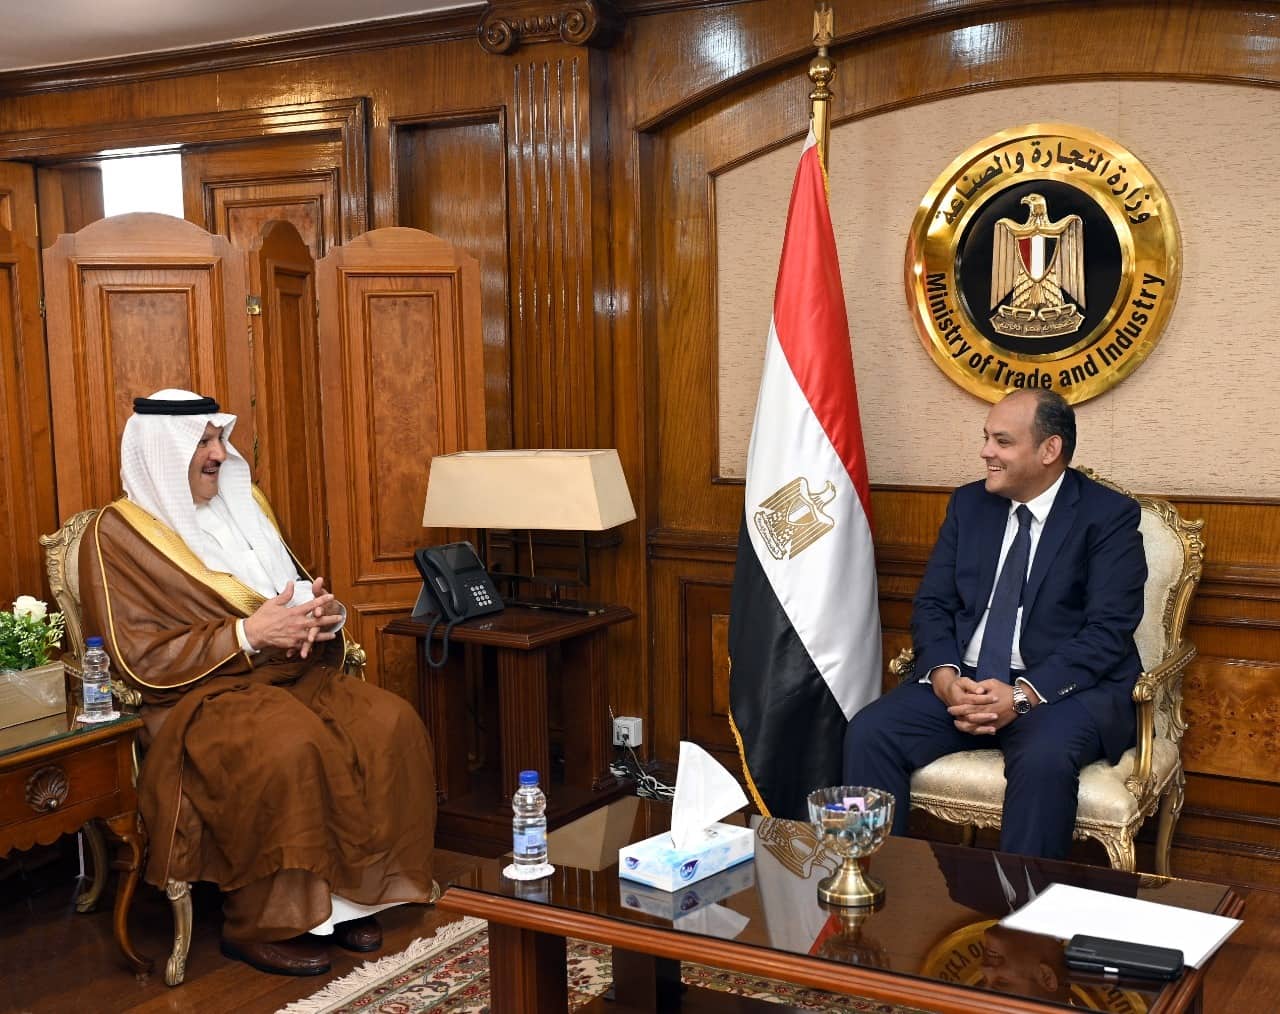 The Minister of Commerce meets with the Saudi Ambassador in Cairo to discuss ways to strengthen economic relations between the two countries.